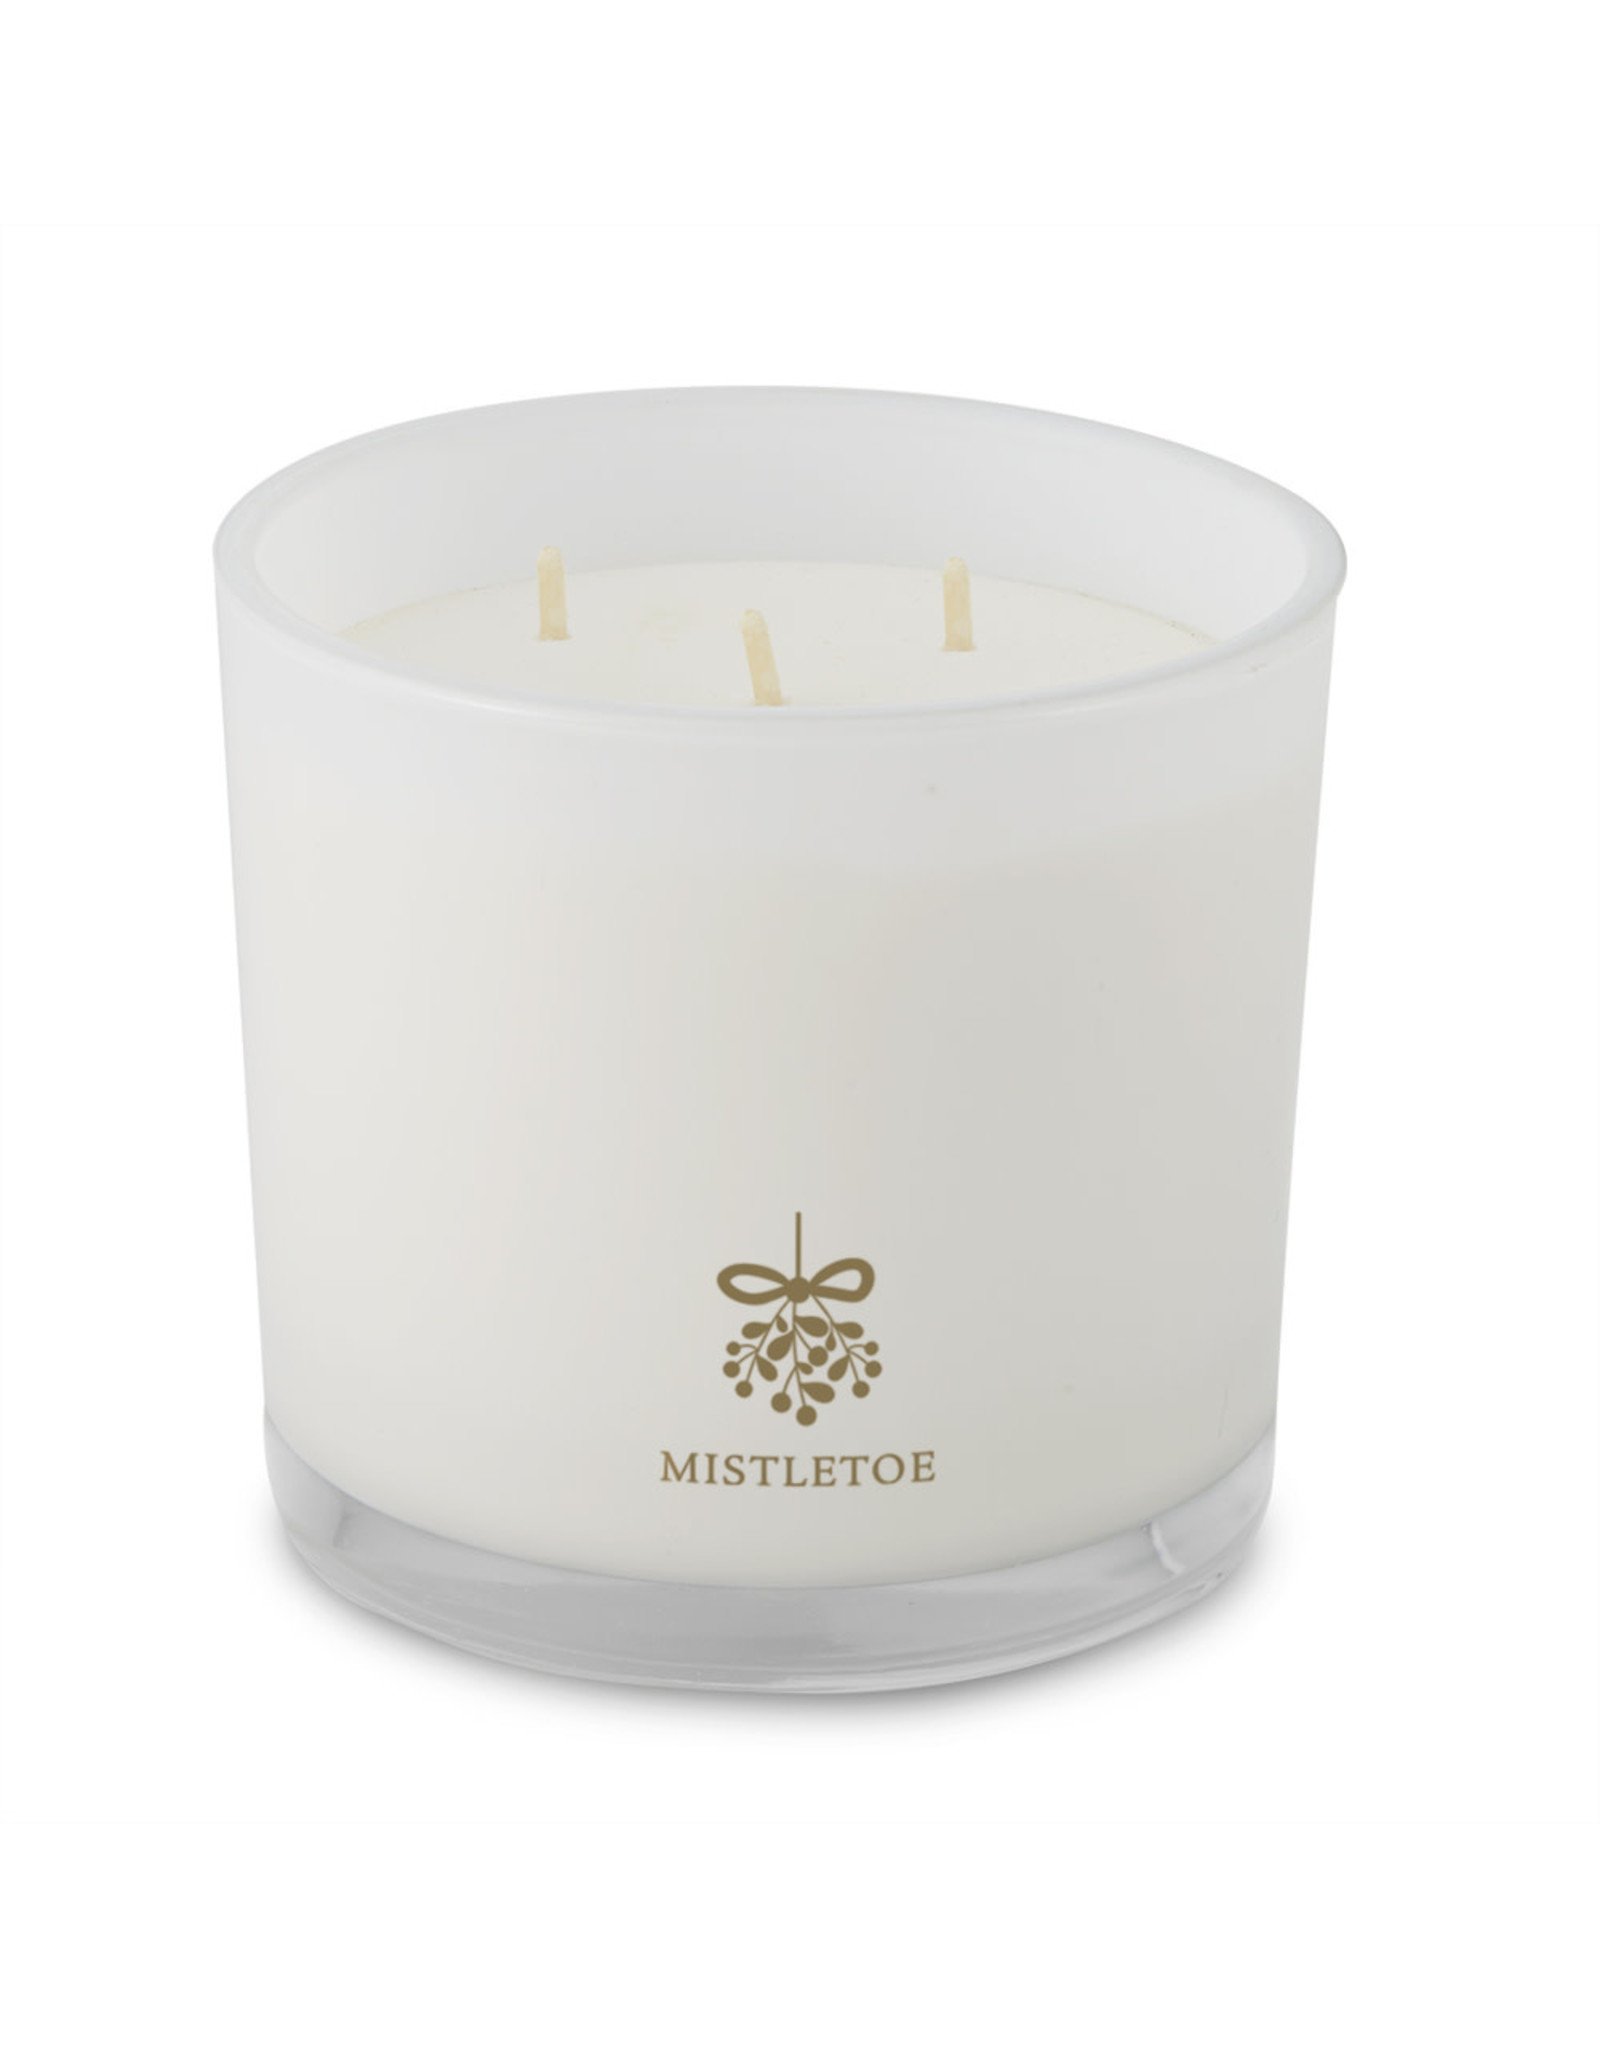 Root Candle - Mistletoe 3-Wick Honeycomb Candle